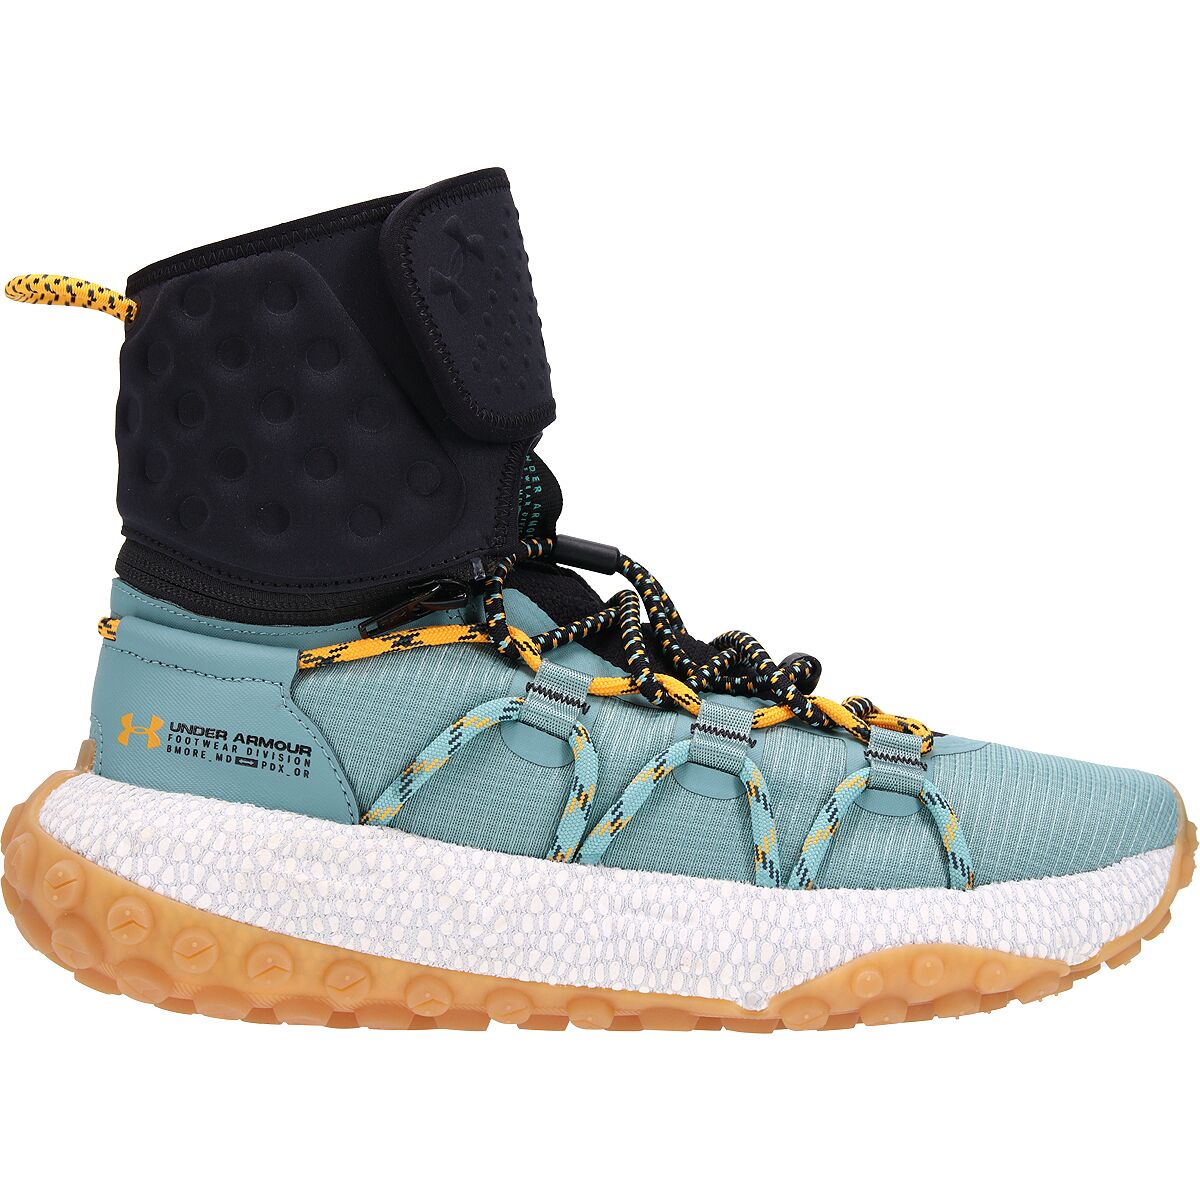 Under Armour HOVR Summit FT Cuff Sneaker